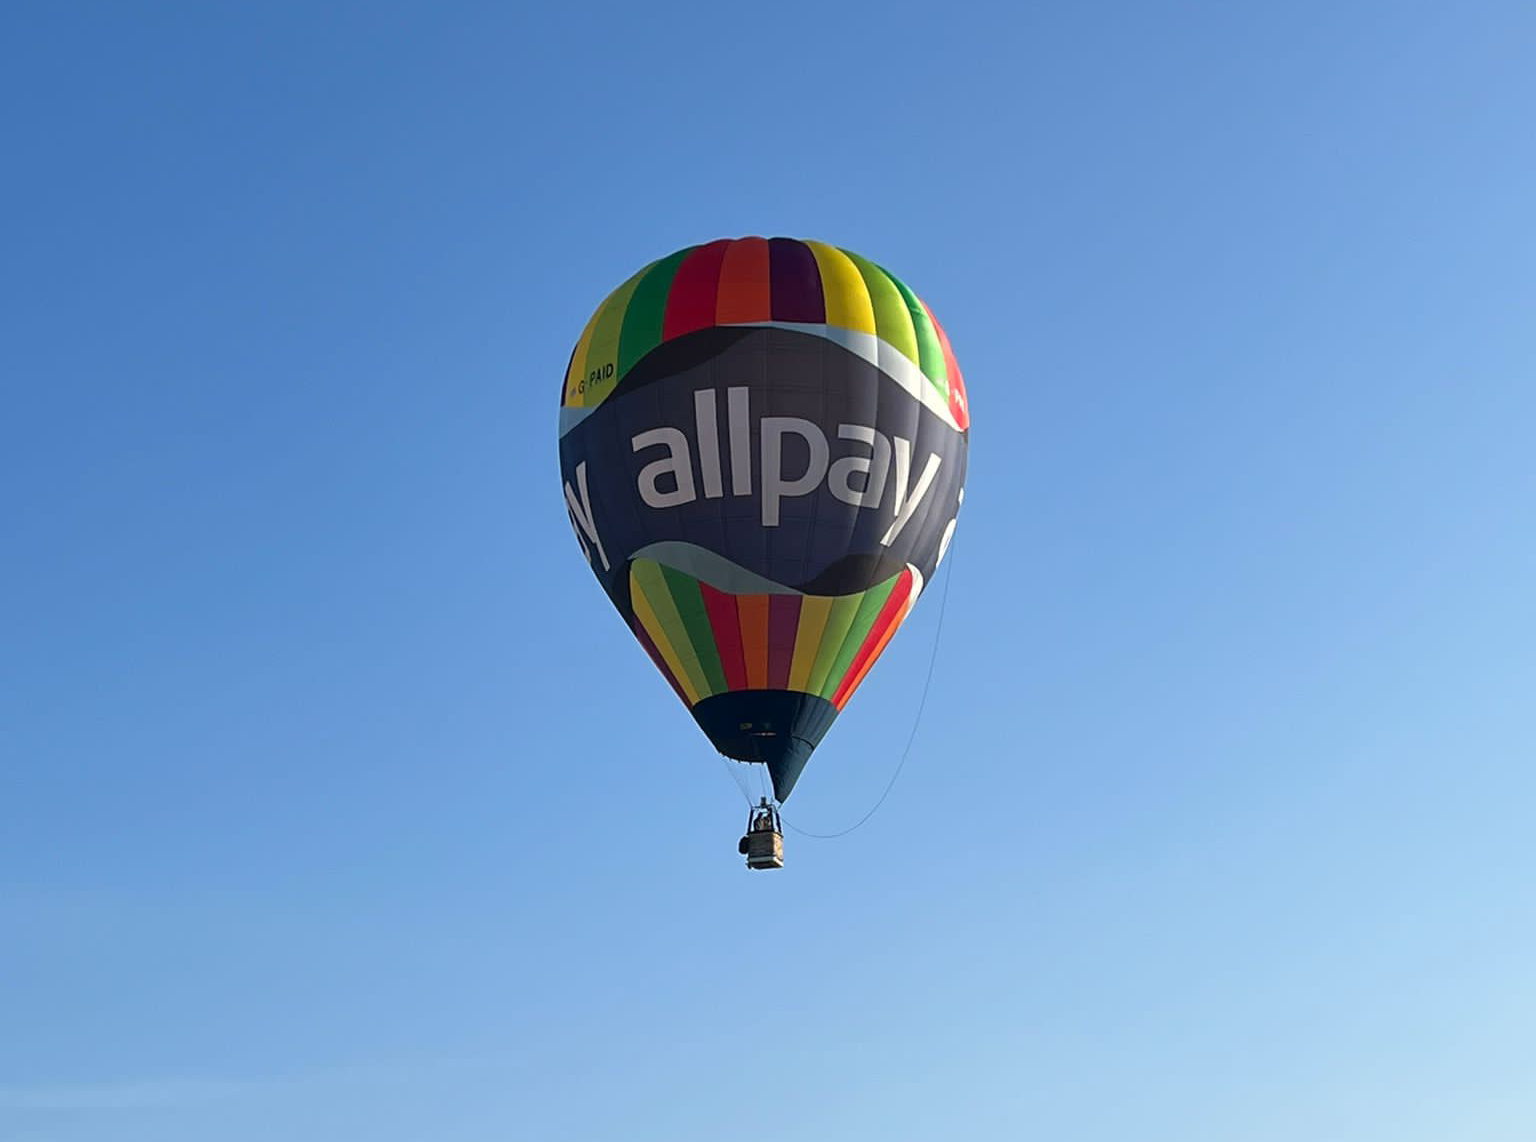 allpay Limited Takes to the Skies with New Hot Air Balloon